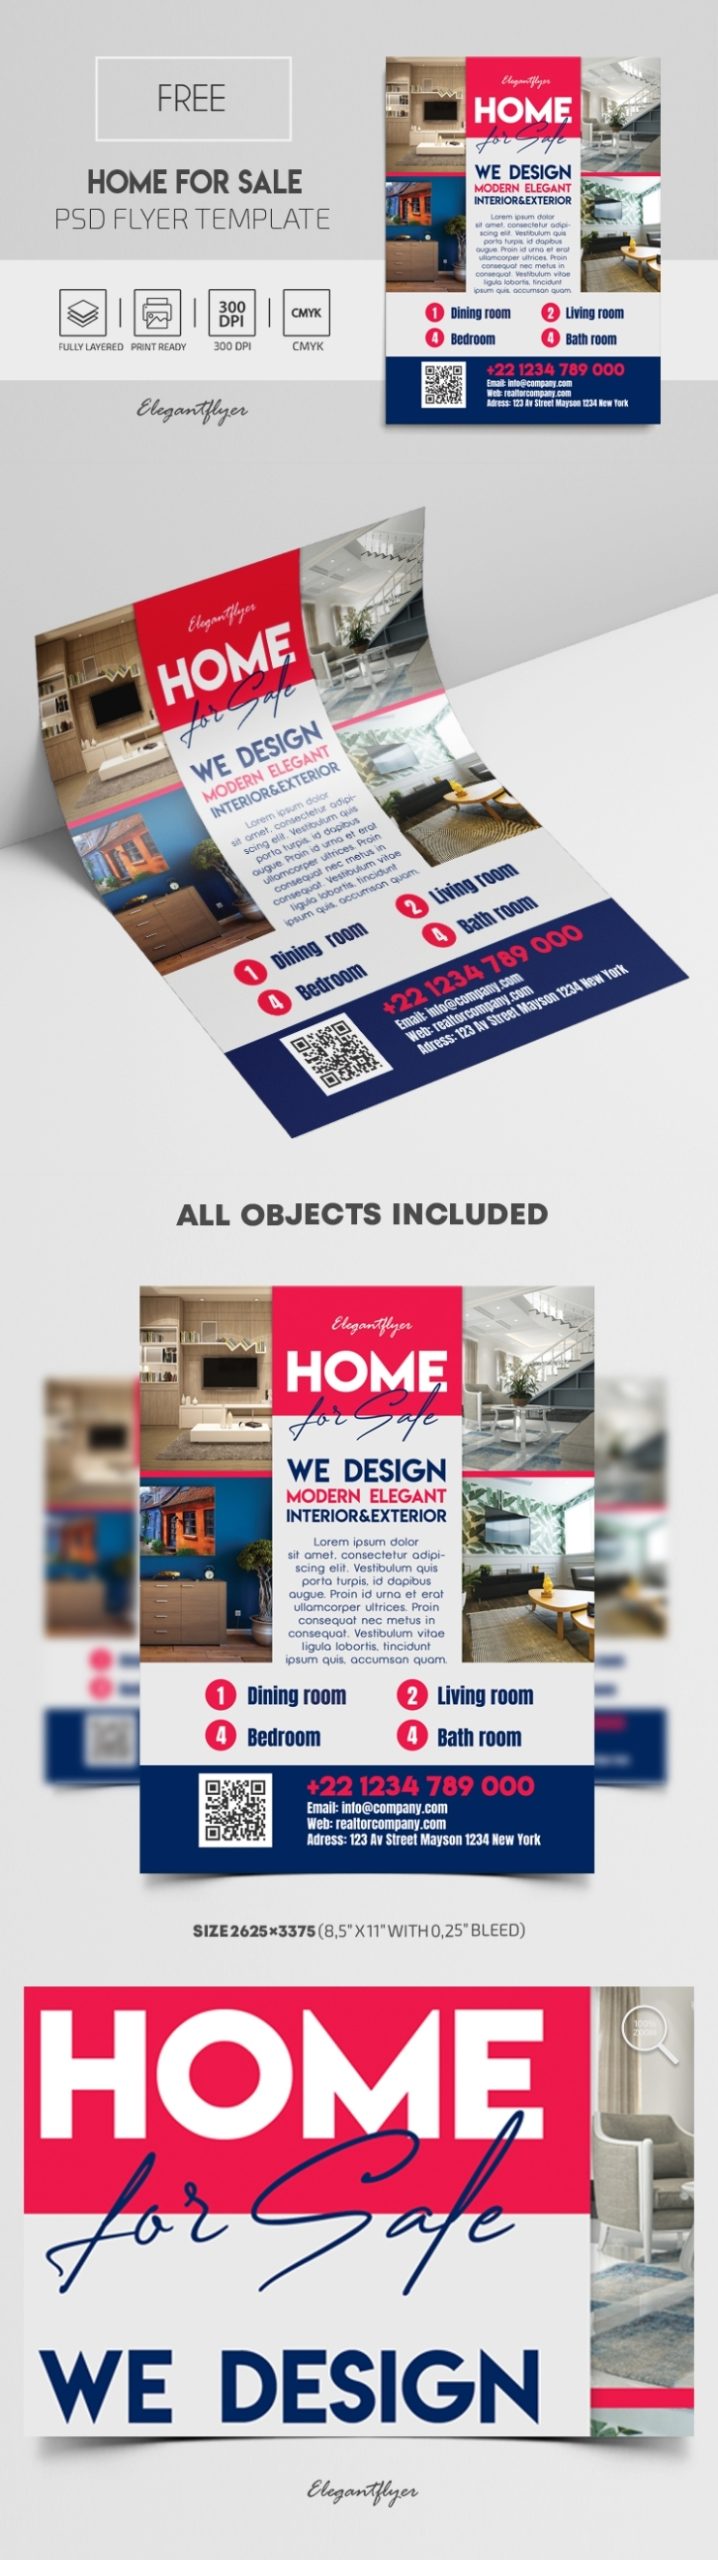 Home For Sale - Free Psd Flyer Template - By Elegantflyer With Regard To Home For Sale Flyer Template